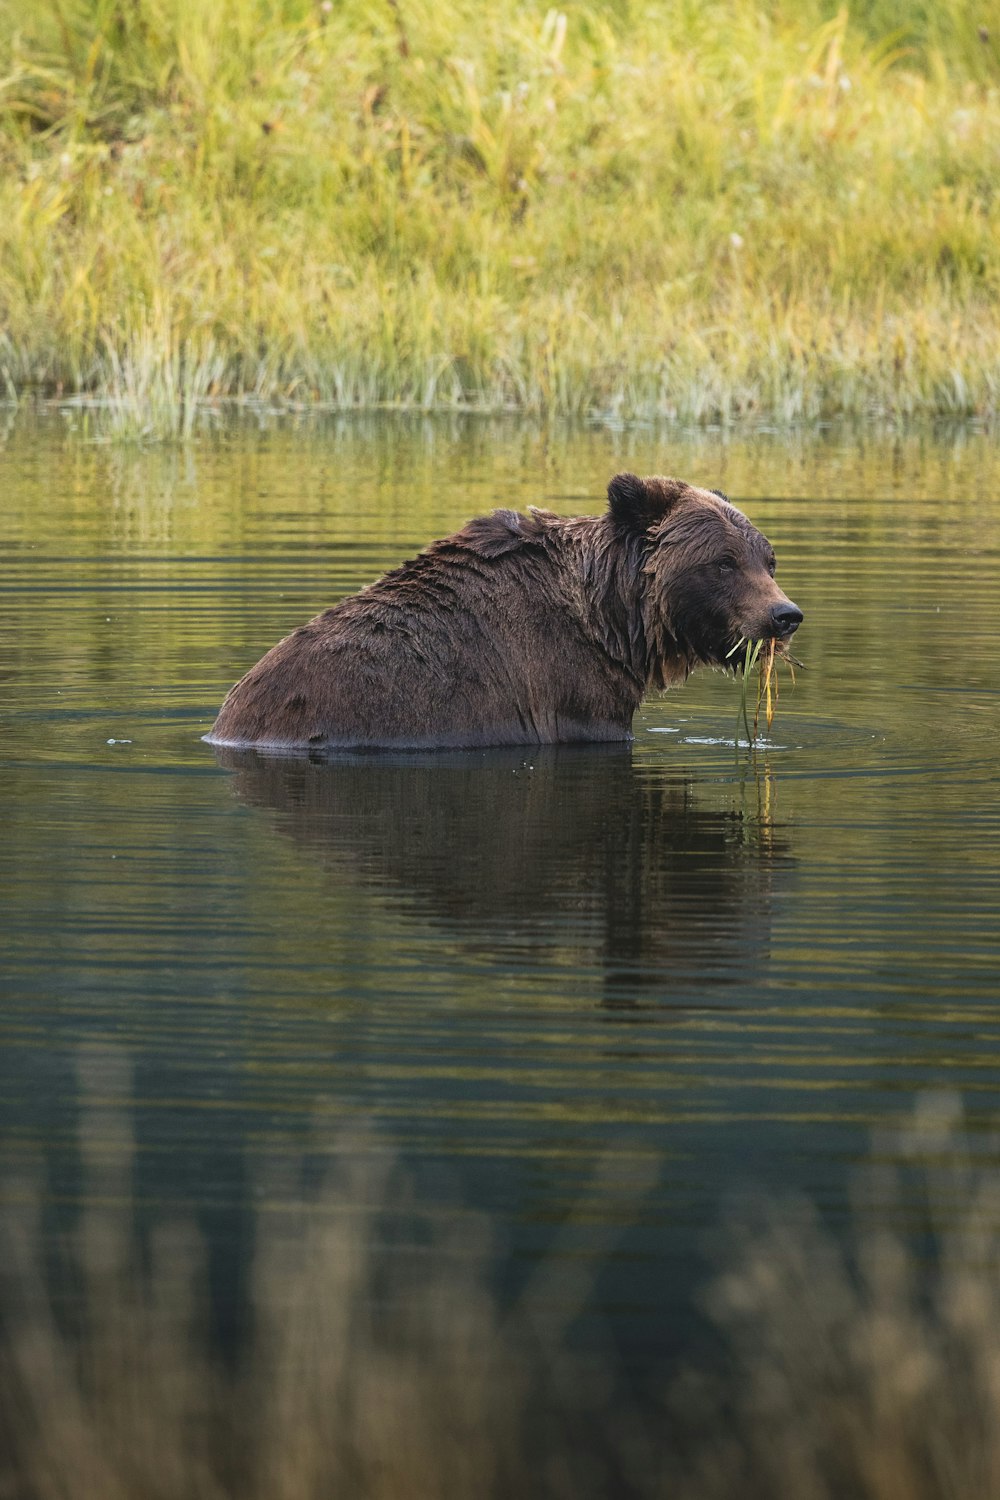 a bear in the water with a fish in it's mouth